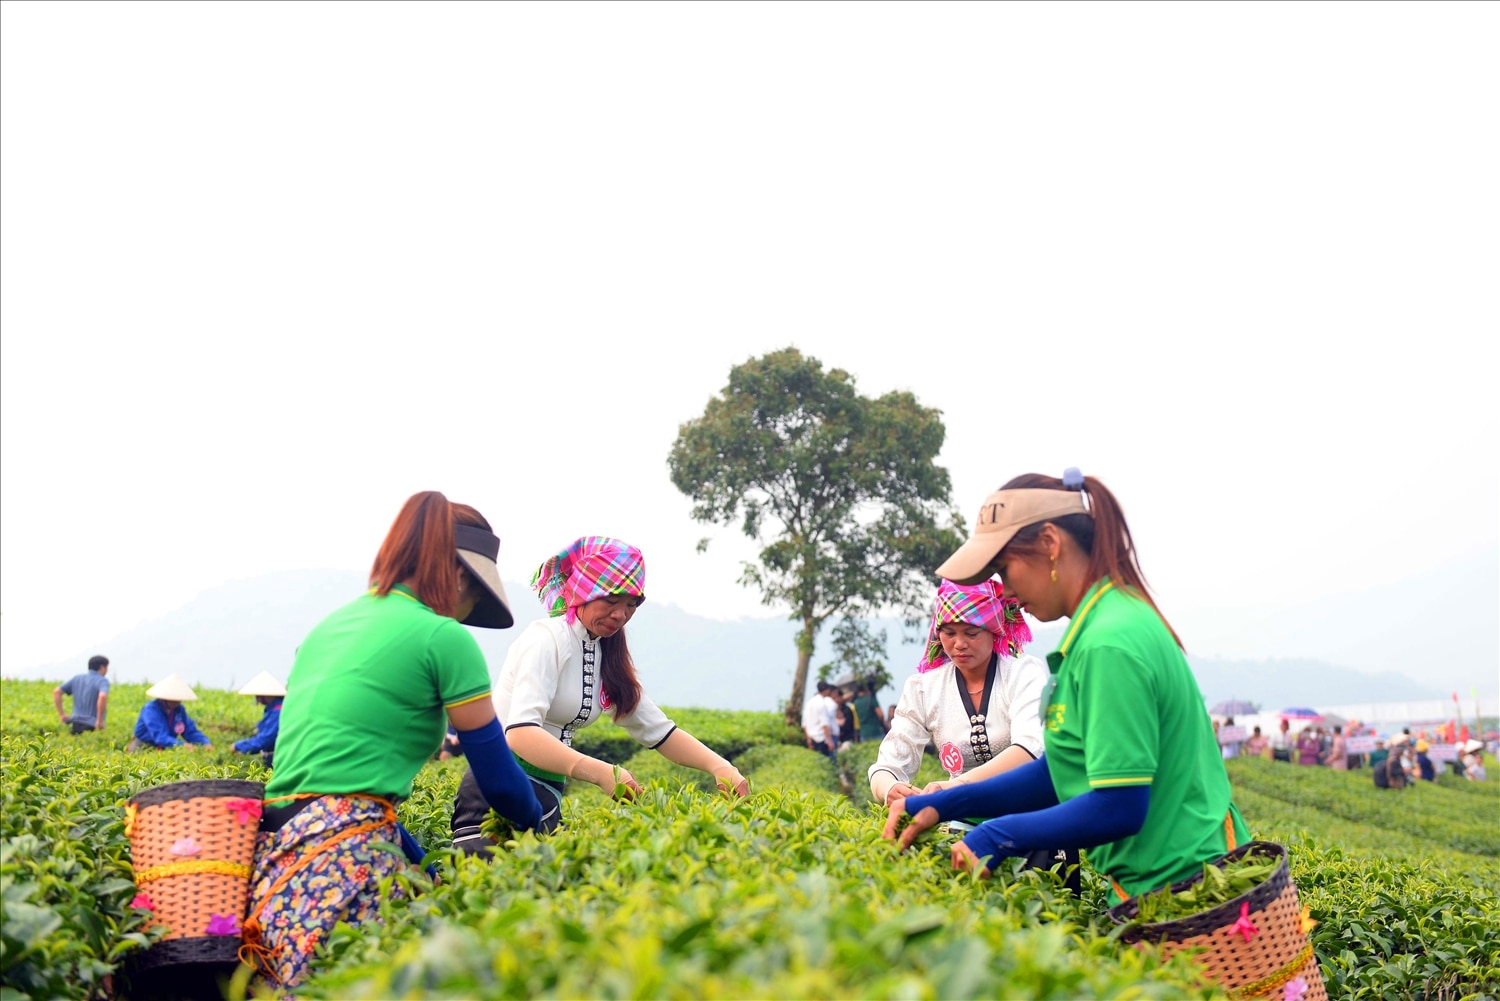 Contestants in traditional costumes quickly picked tea.